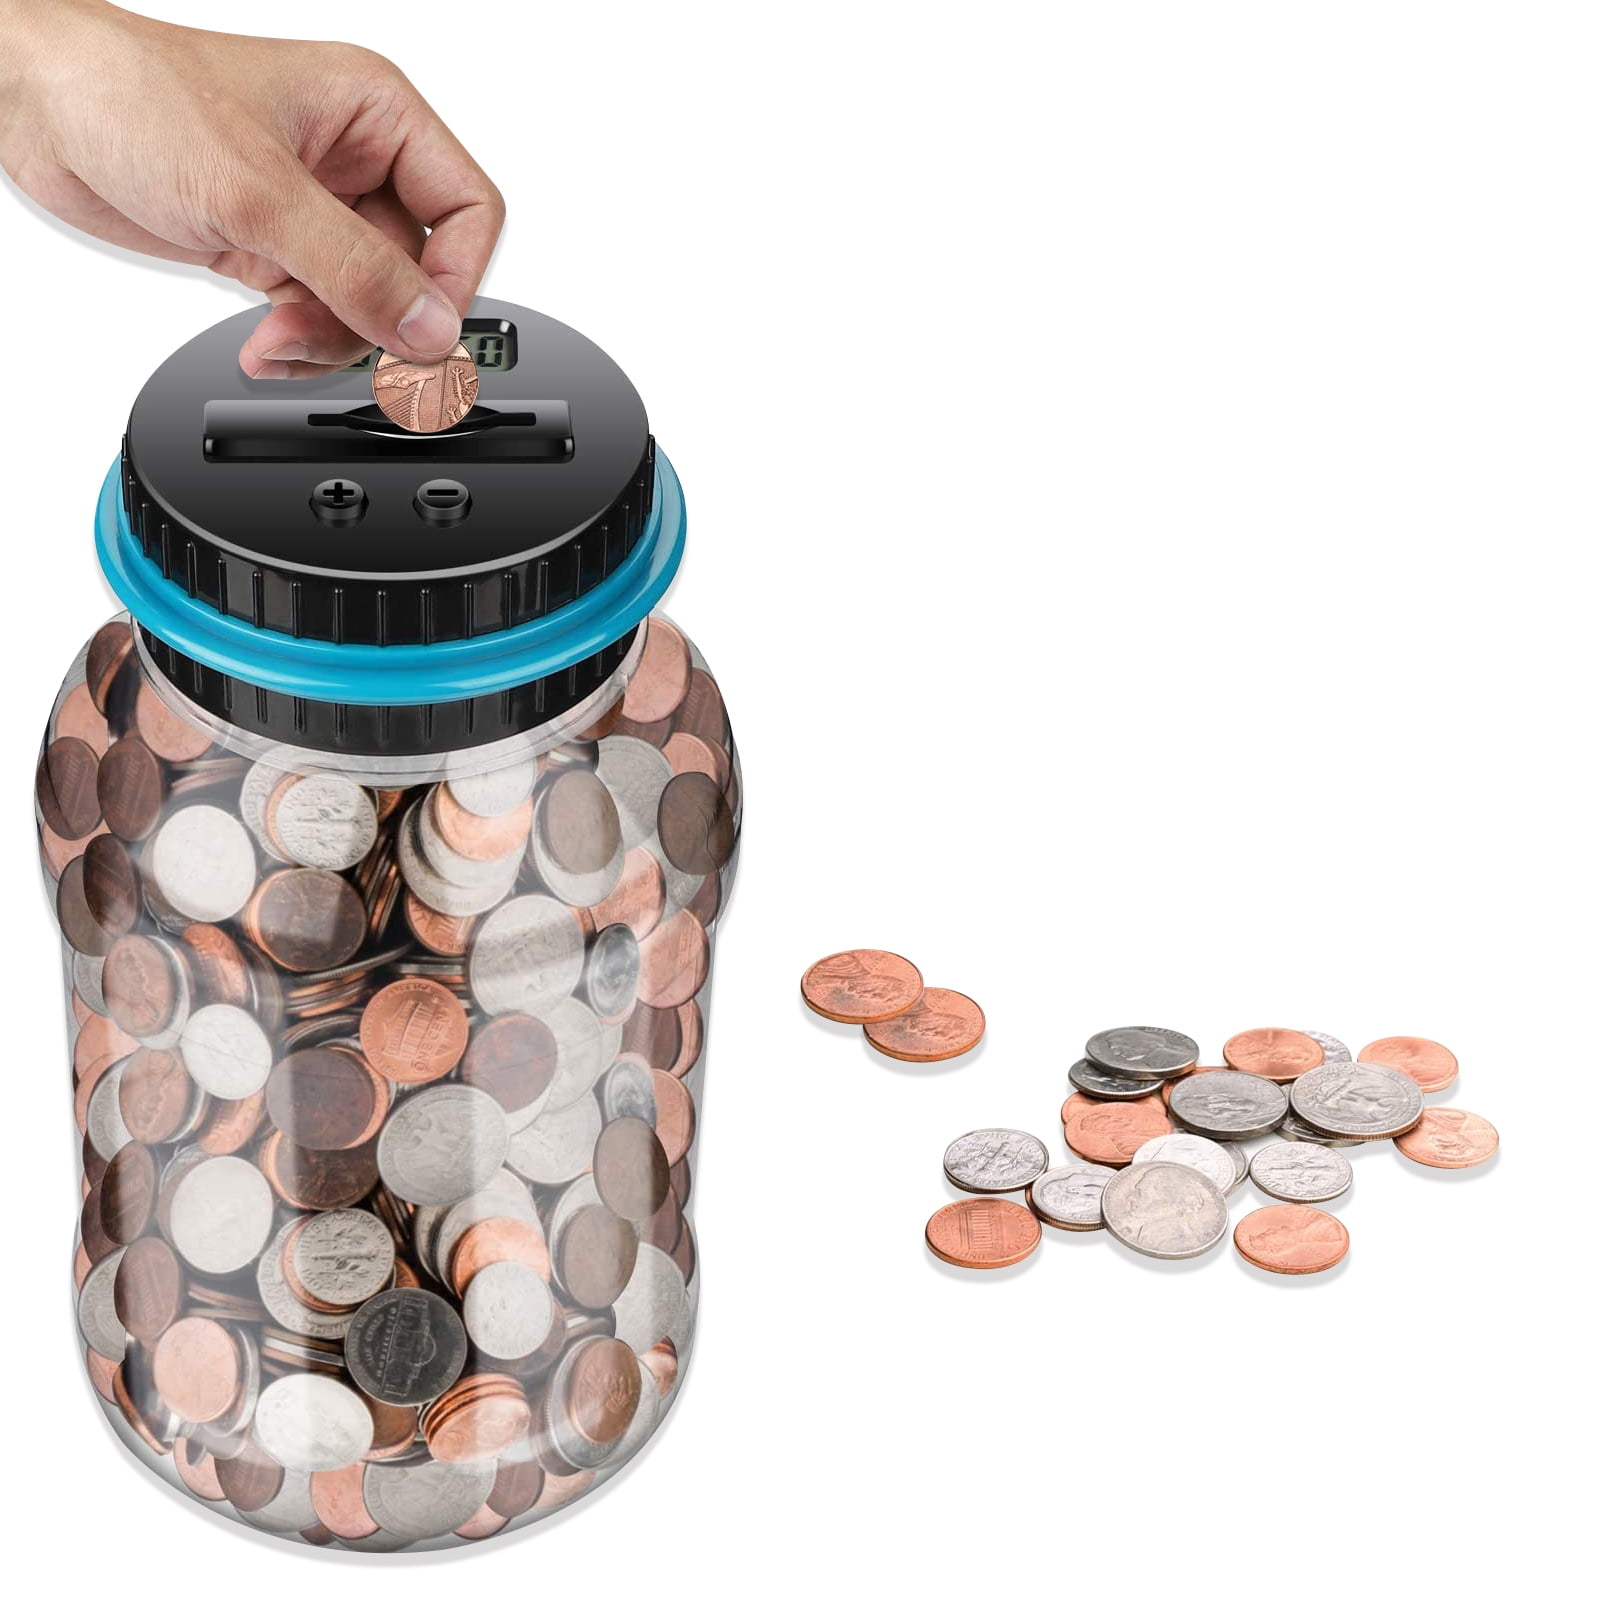 LCD Counting Money Clear Digital Piggy Bank Coin Savings Counter Jar Change Gift 